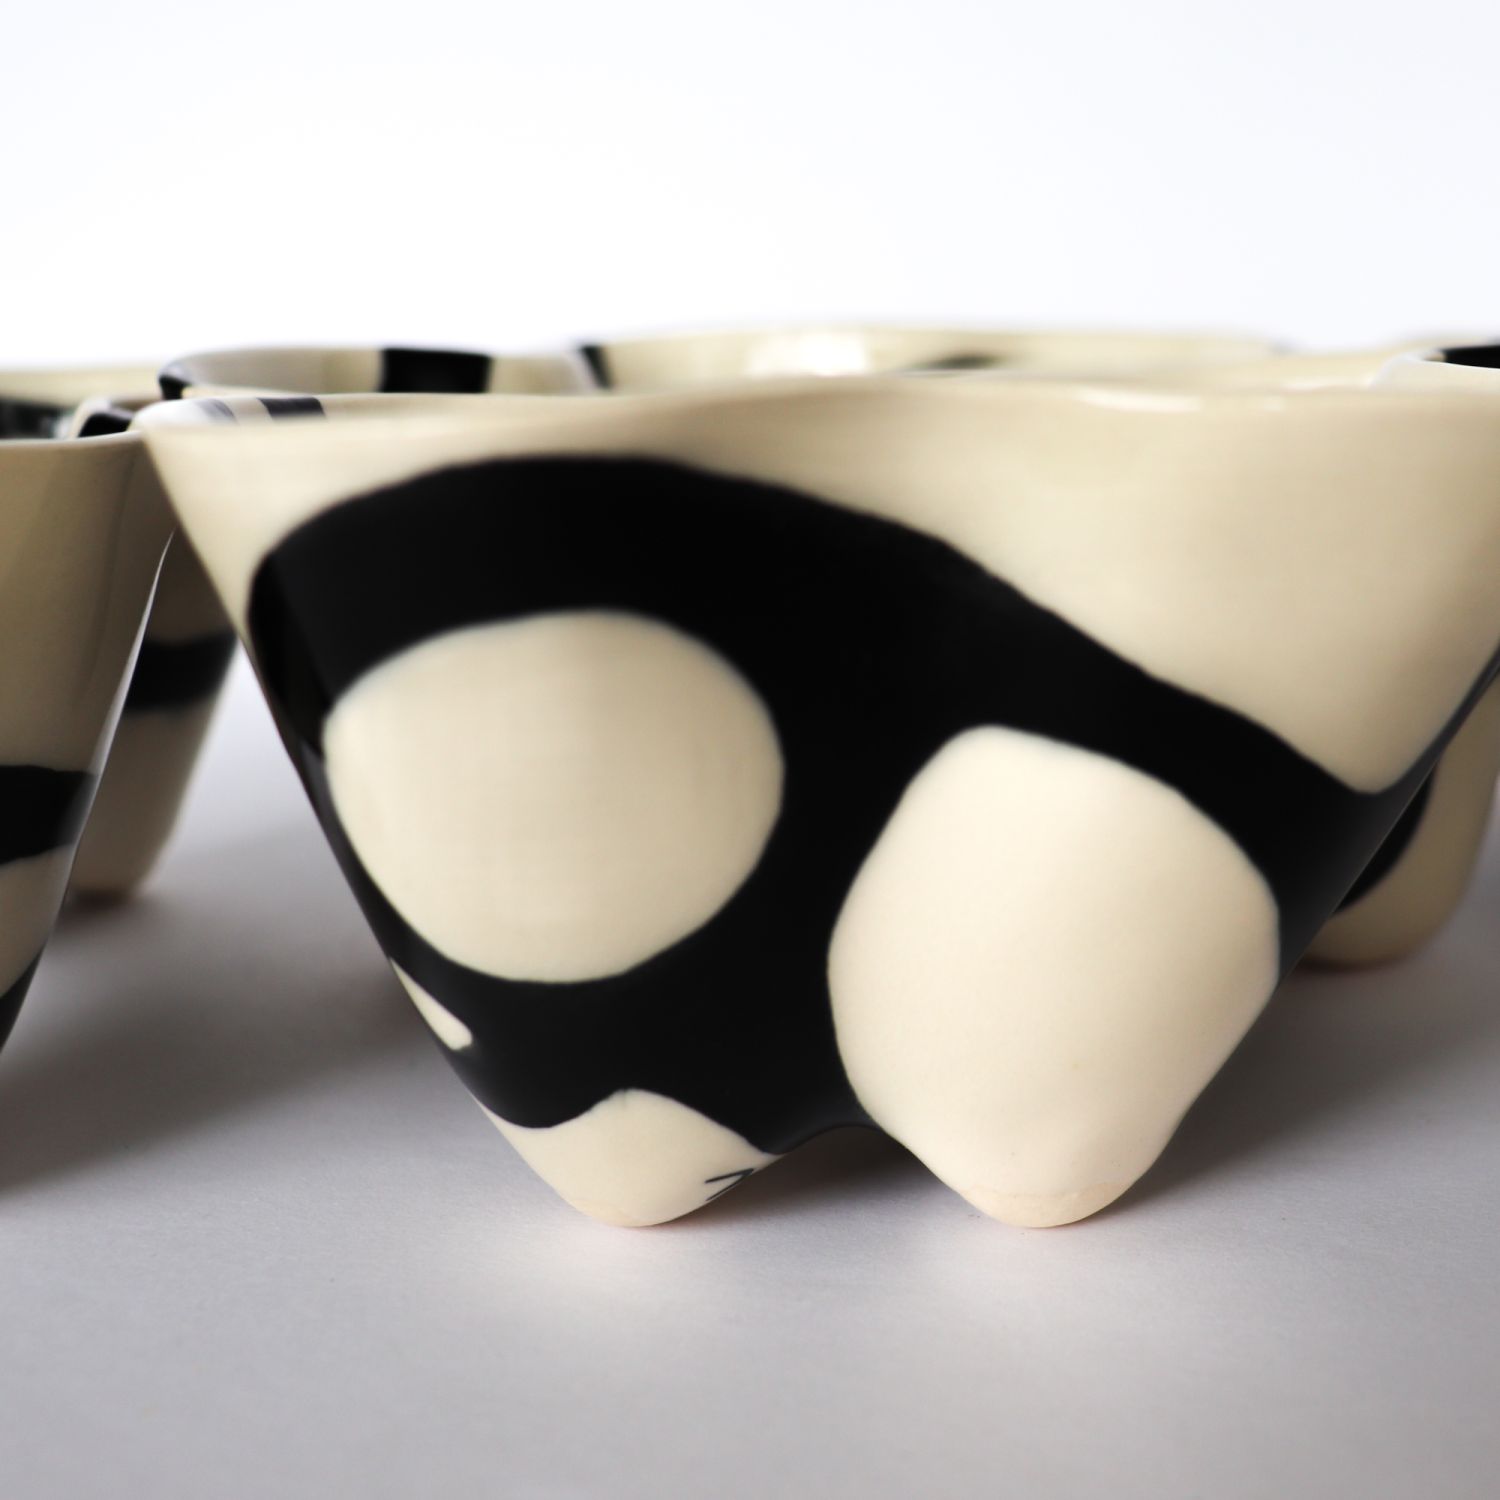 Alana Marcoccia: Interconnected Sculptural Bowl Product Image 4 of 12